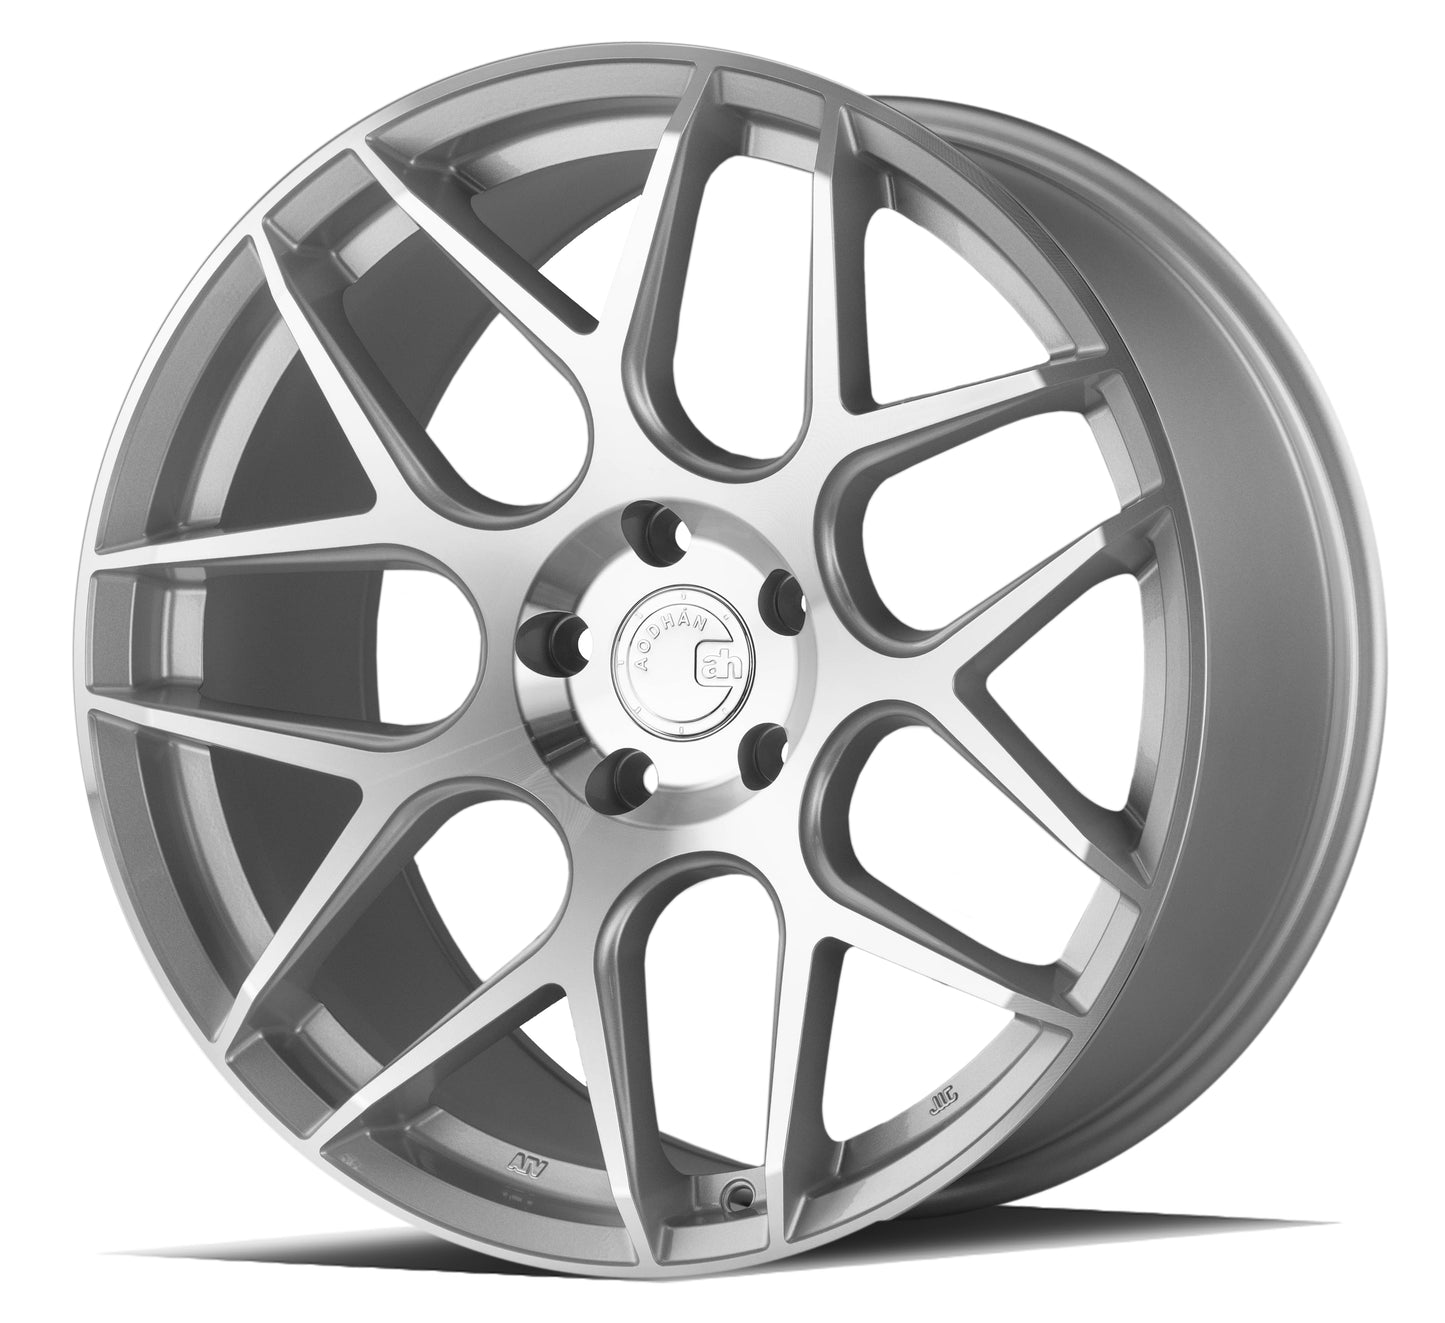 Aodhan Wheels AFF2 Silver Machined Face 19x9.5 5x114.3 | +35 | 73.1